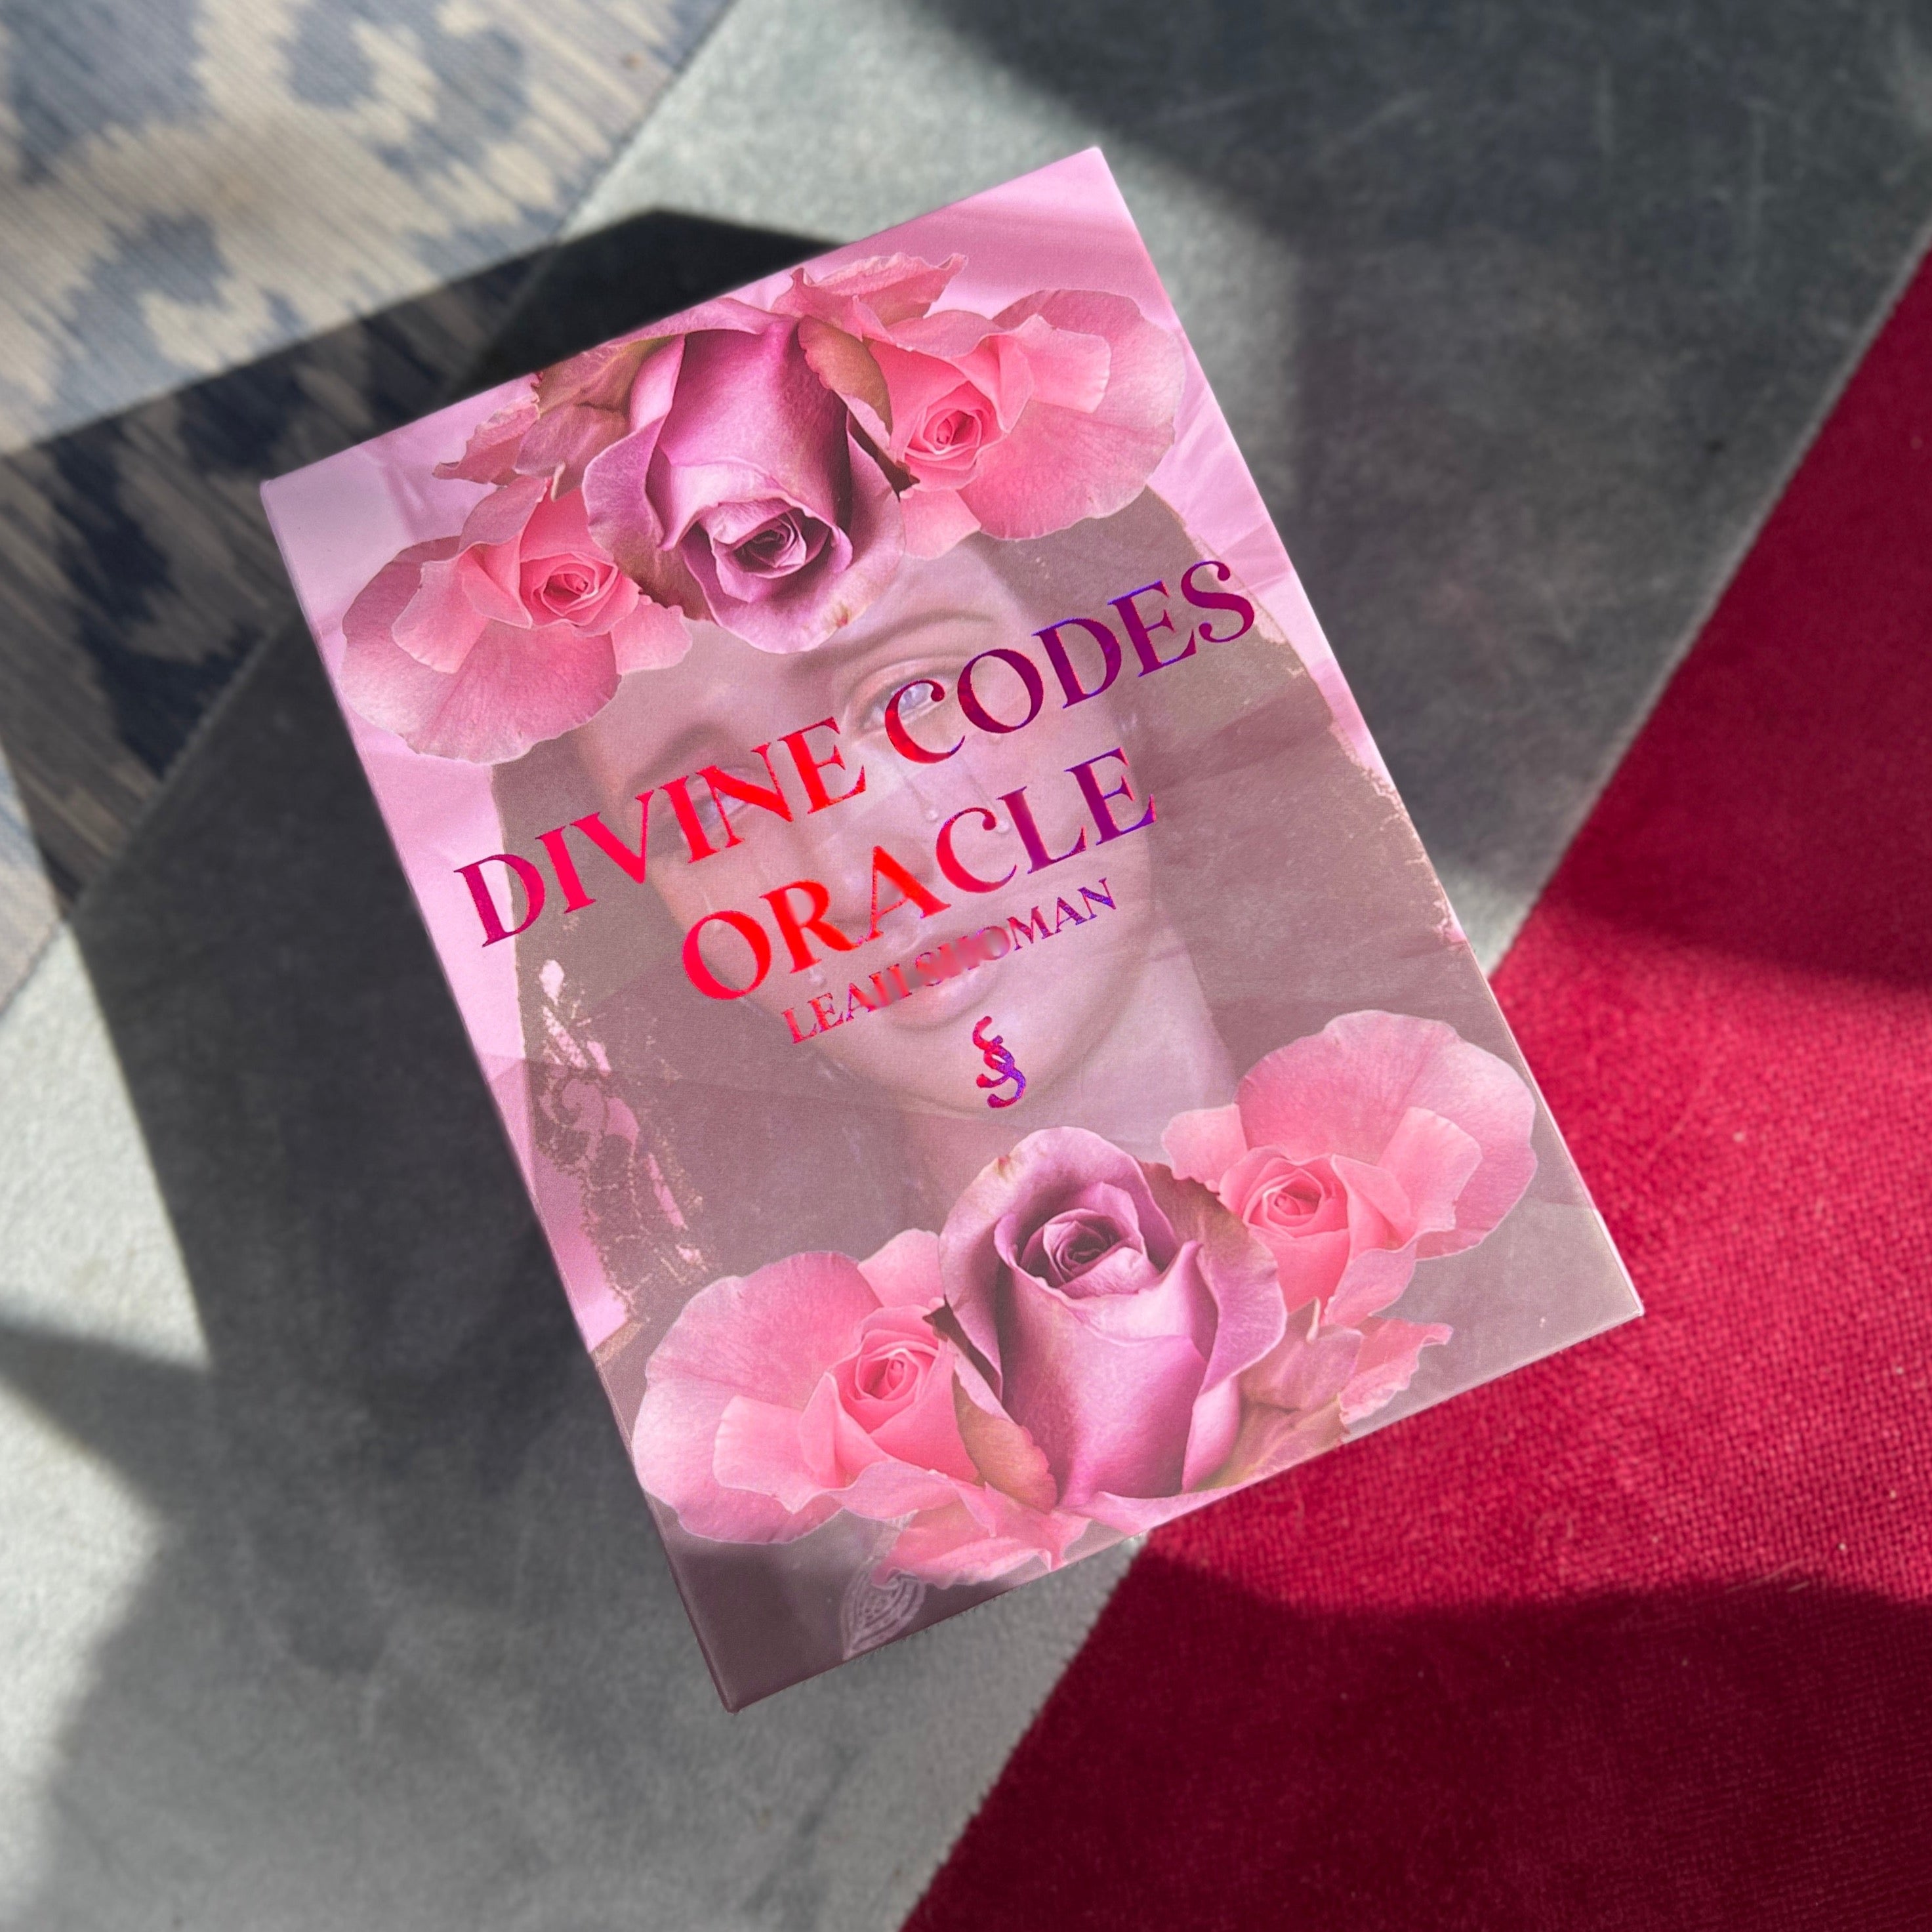 Divine Codes Oracle is not one thing, it is everything. It will be exactly what you need it to be in every season of life. It will attune to your energy when you hold it and it will tell you exactly what you need to hear in that moment.   Activating, loving, safe, truthful and divinely guided.